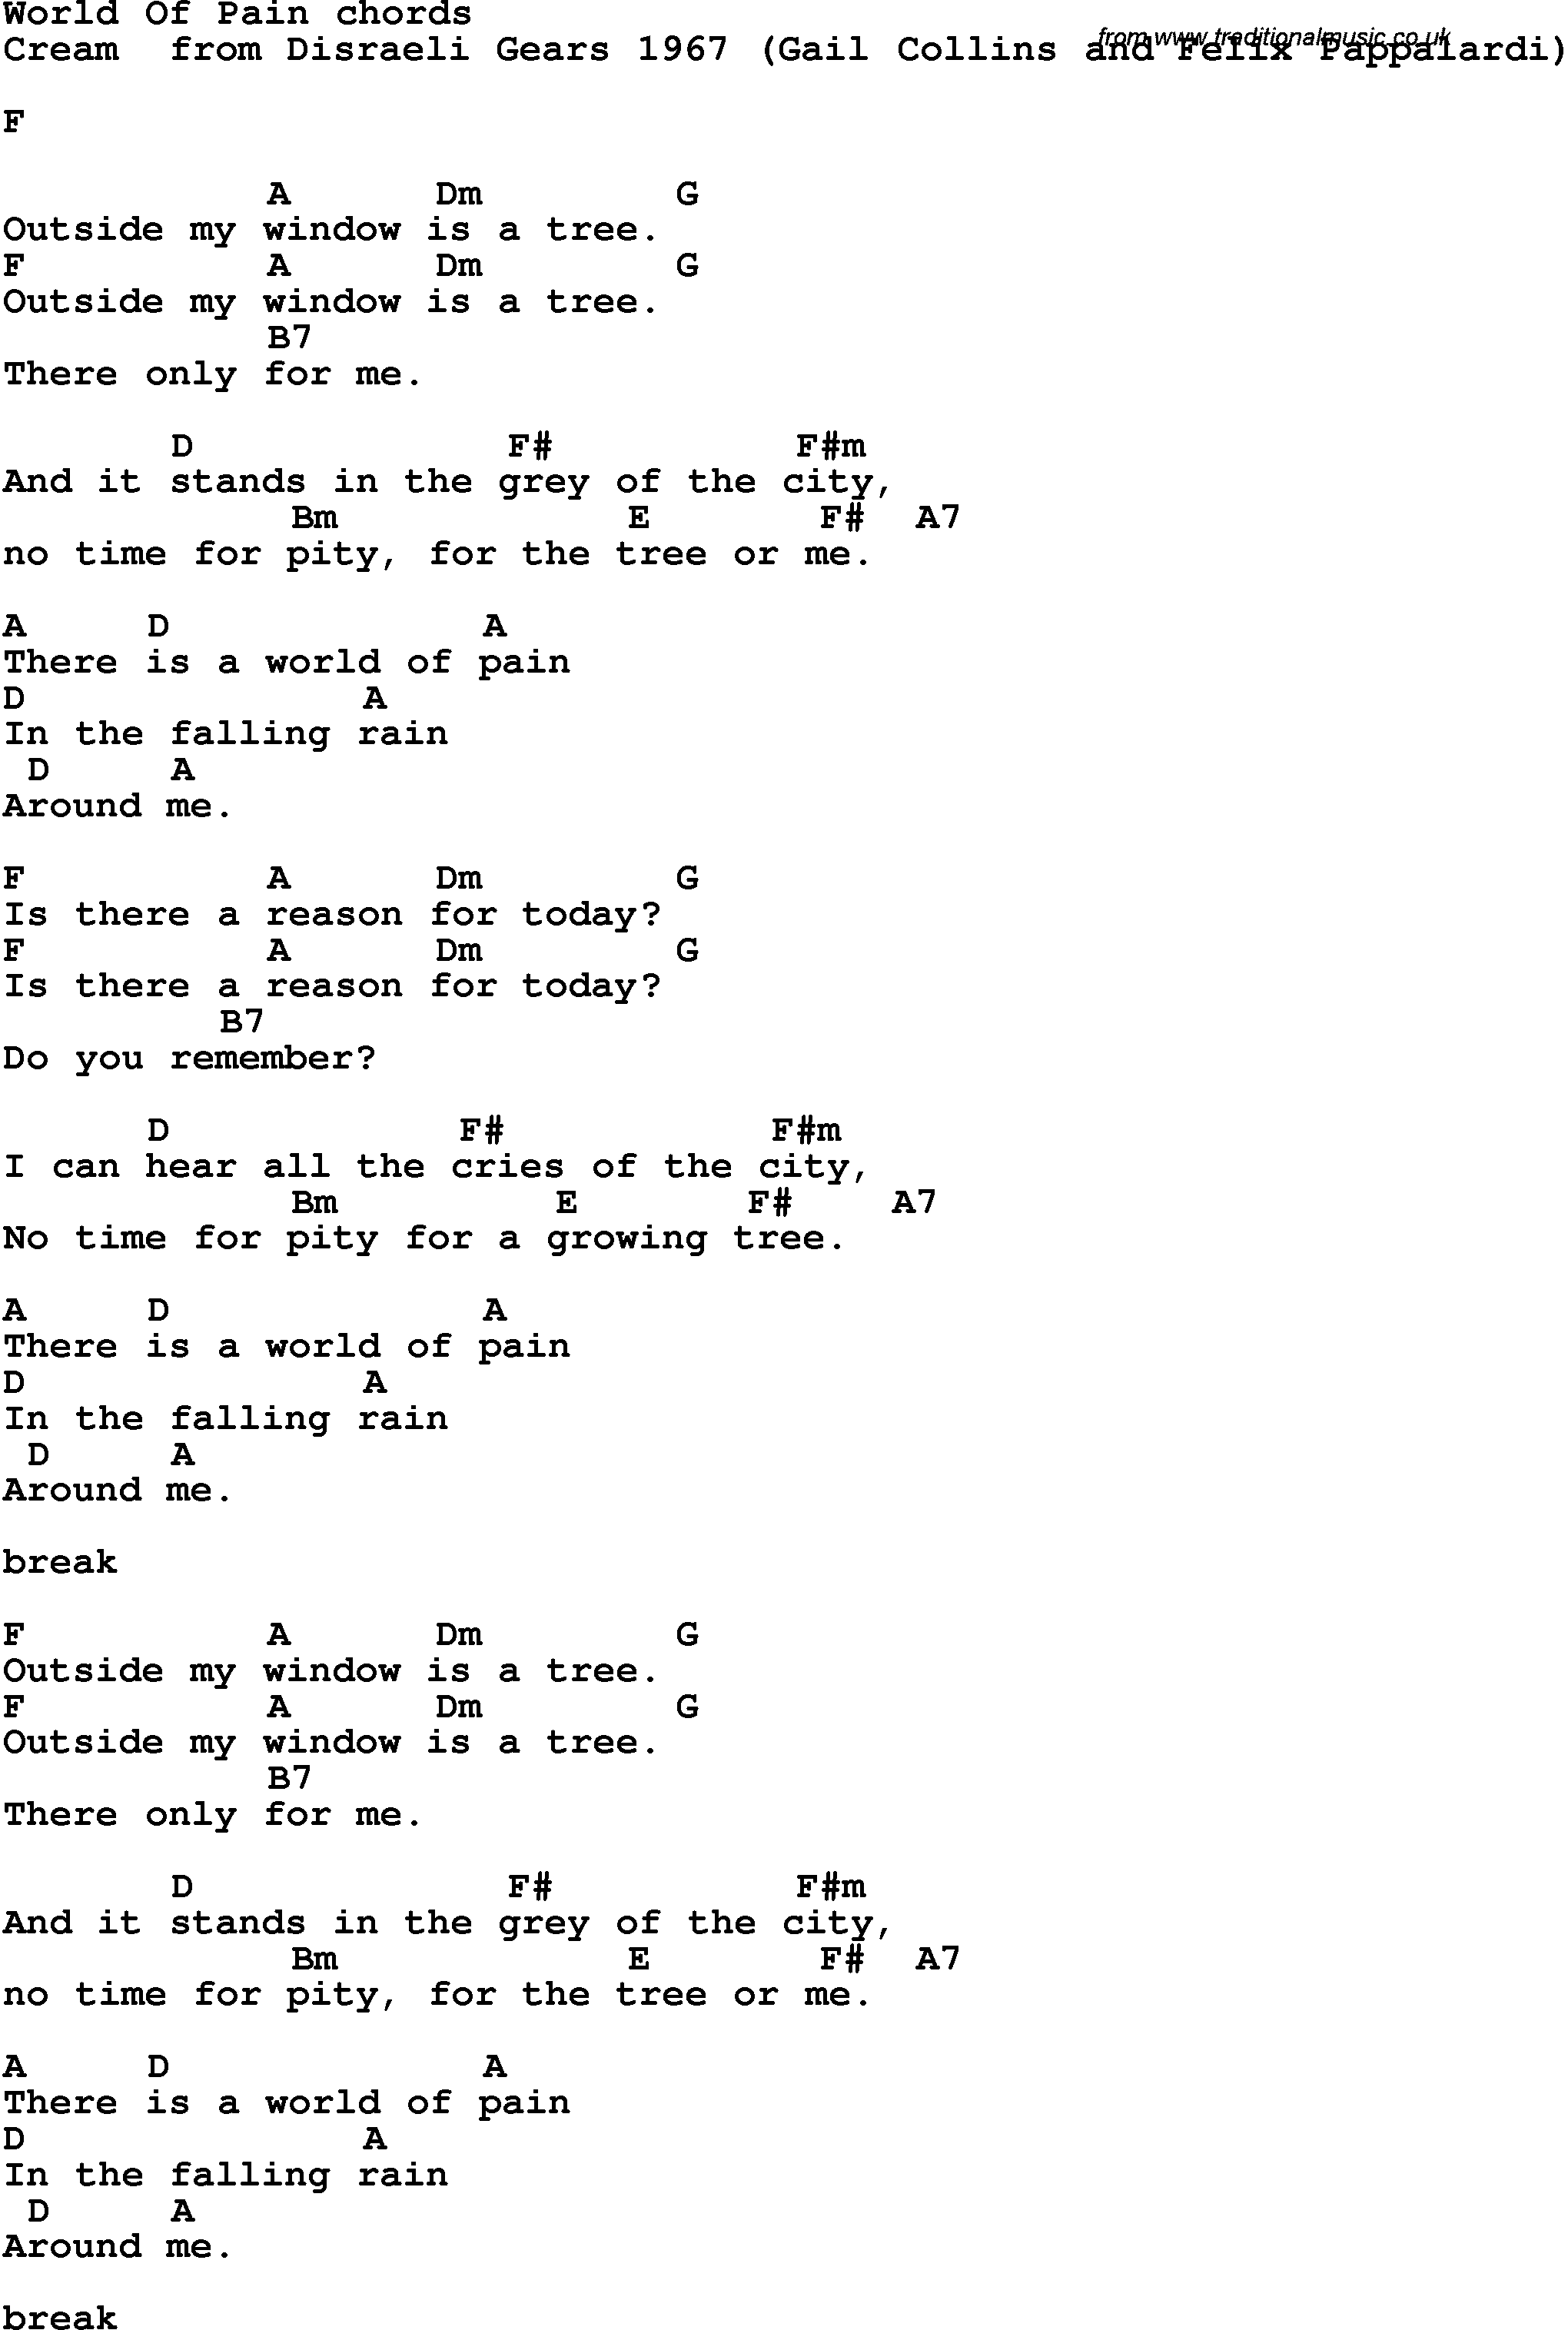 Song Lyrics with guitar chords for World Of Pain